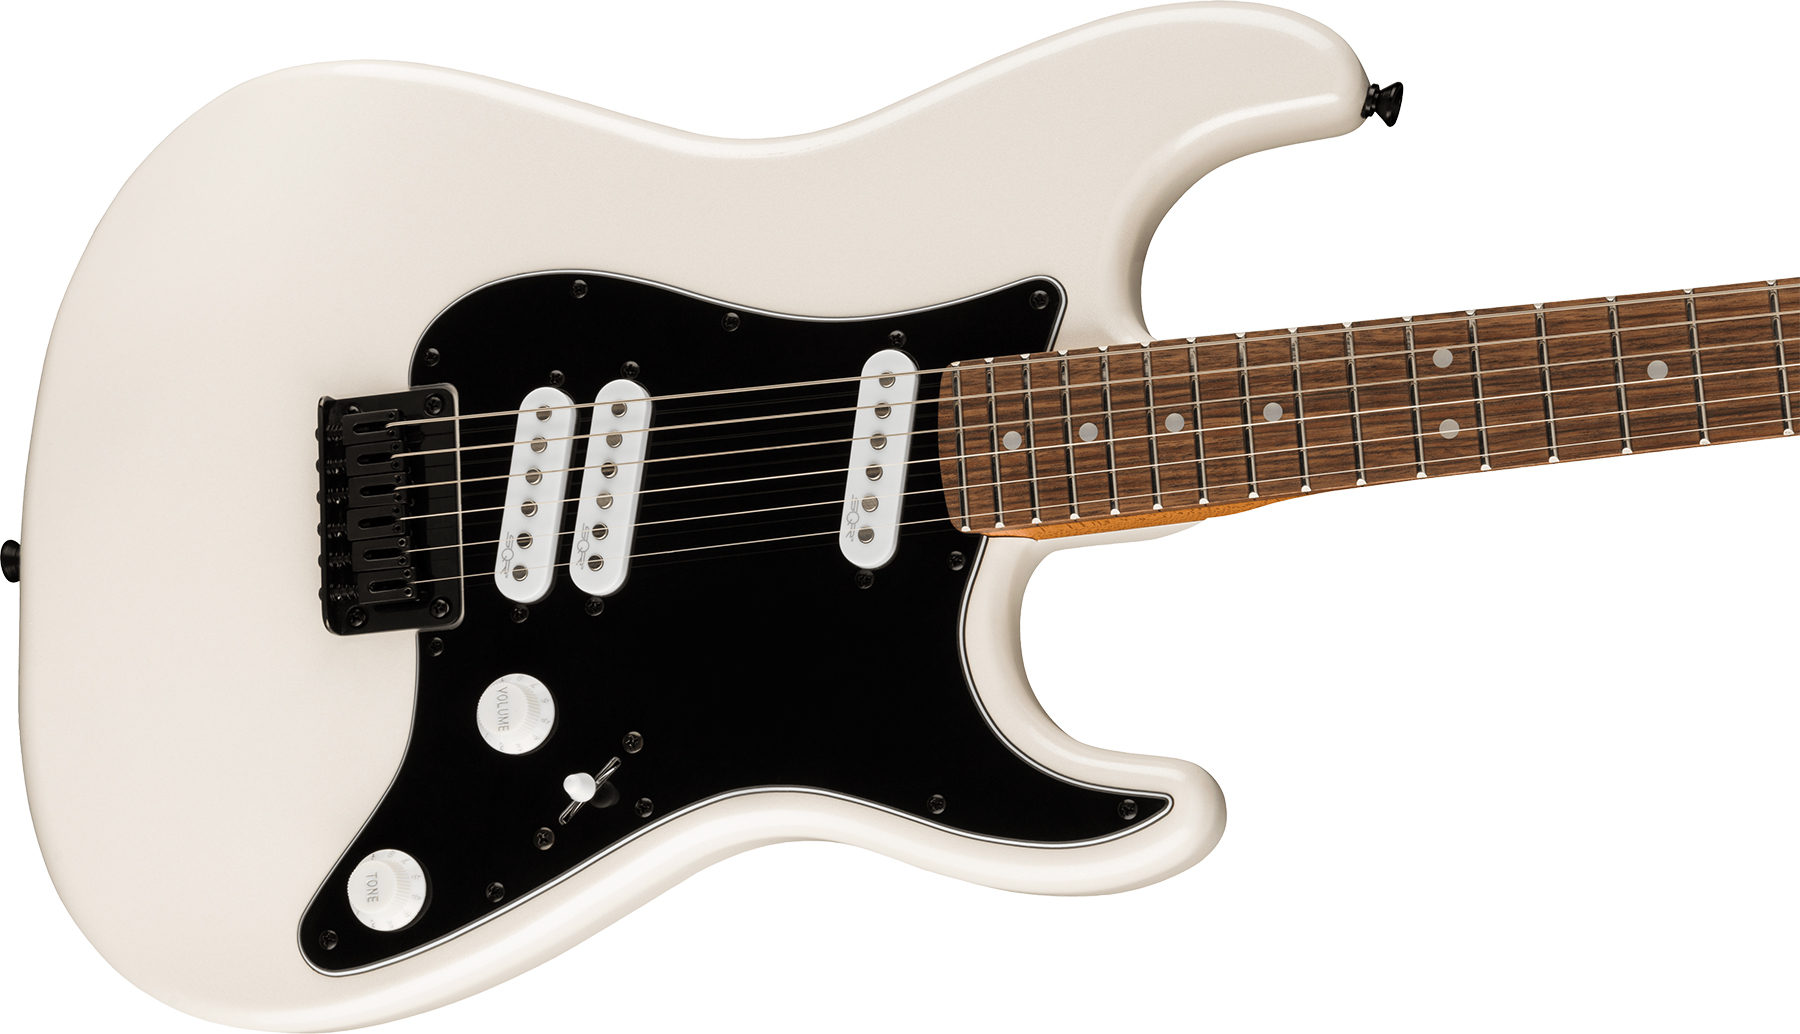 Squier Strat Contemporary Special Ht Sss Lau - Pearl White - Str shape electric guitar - Variation 2